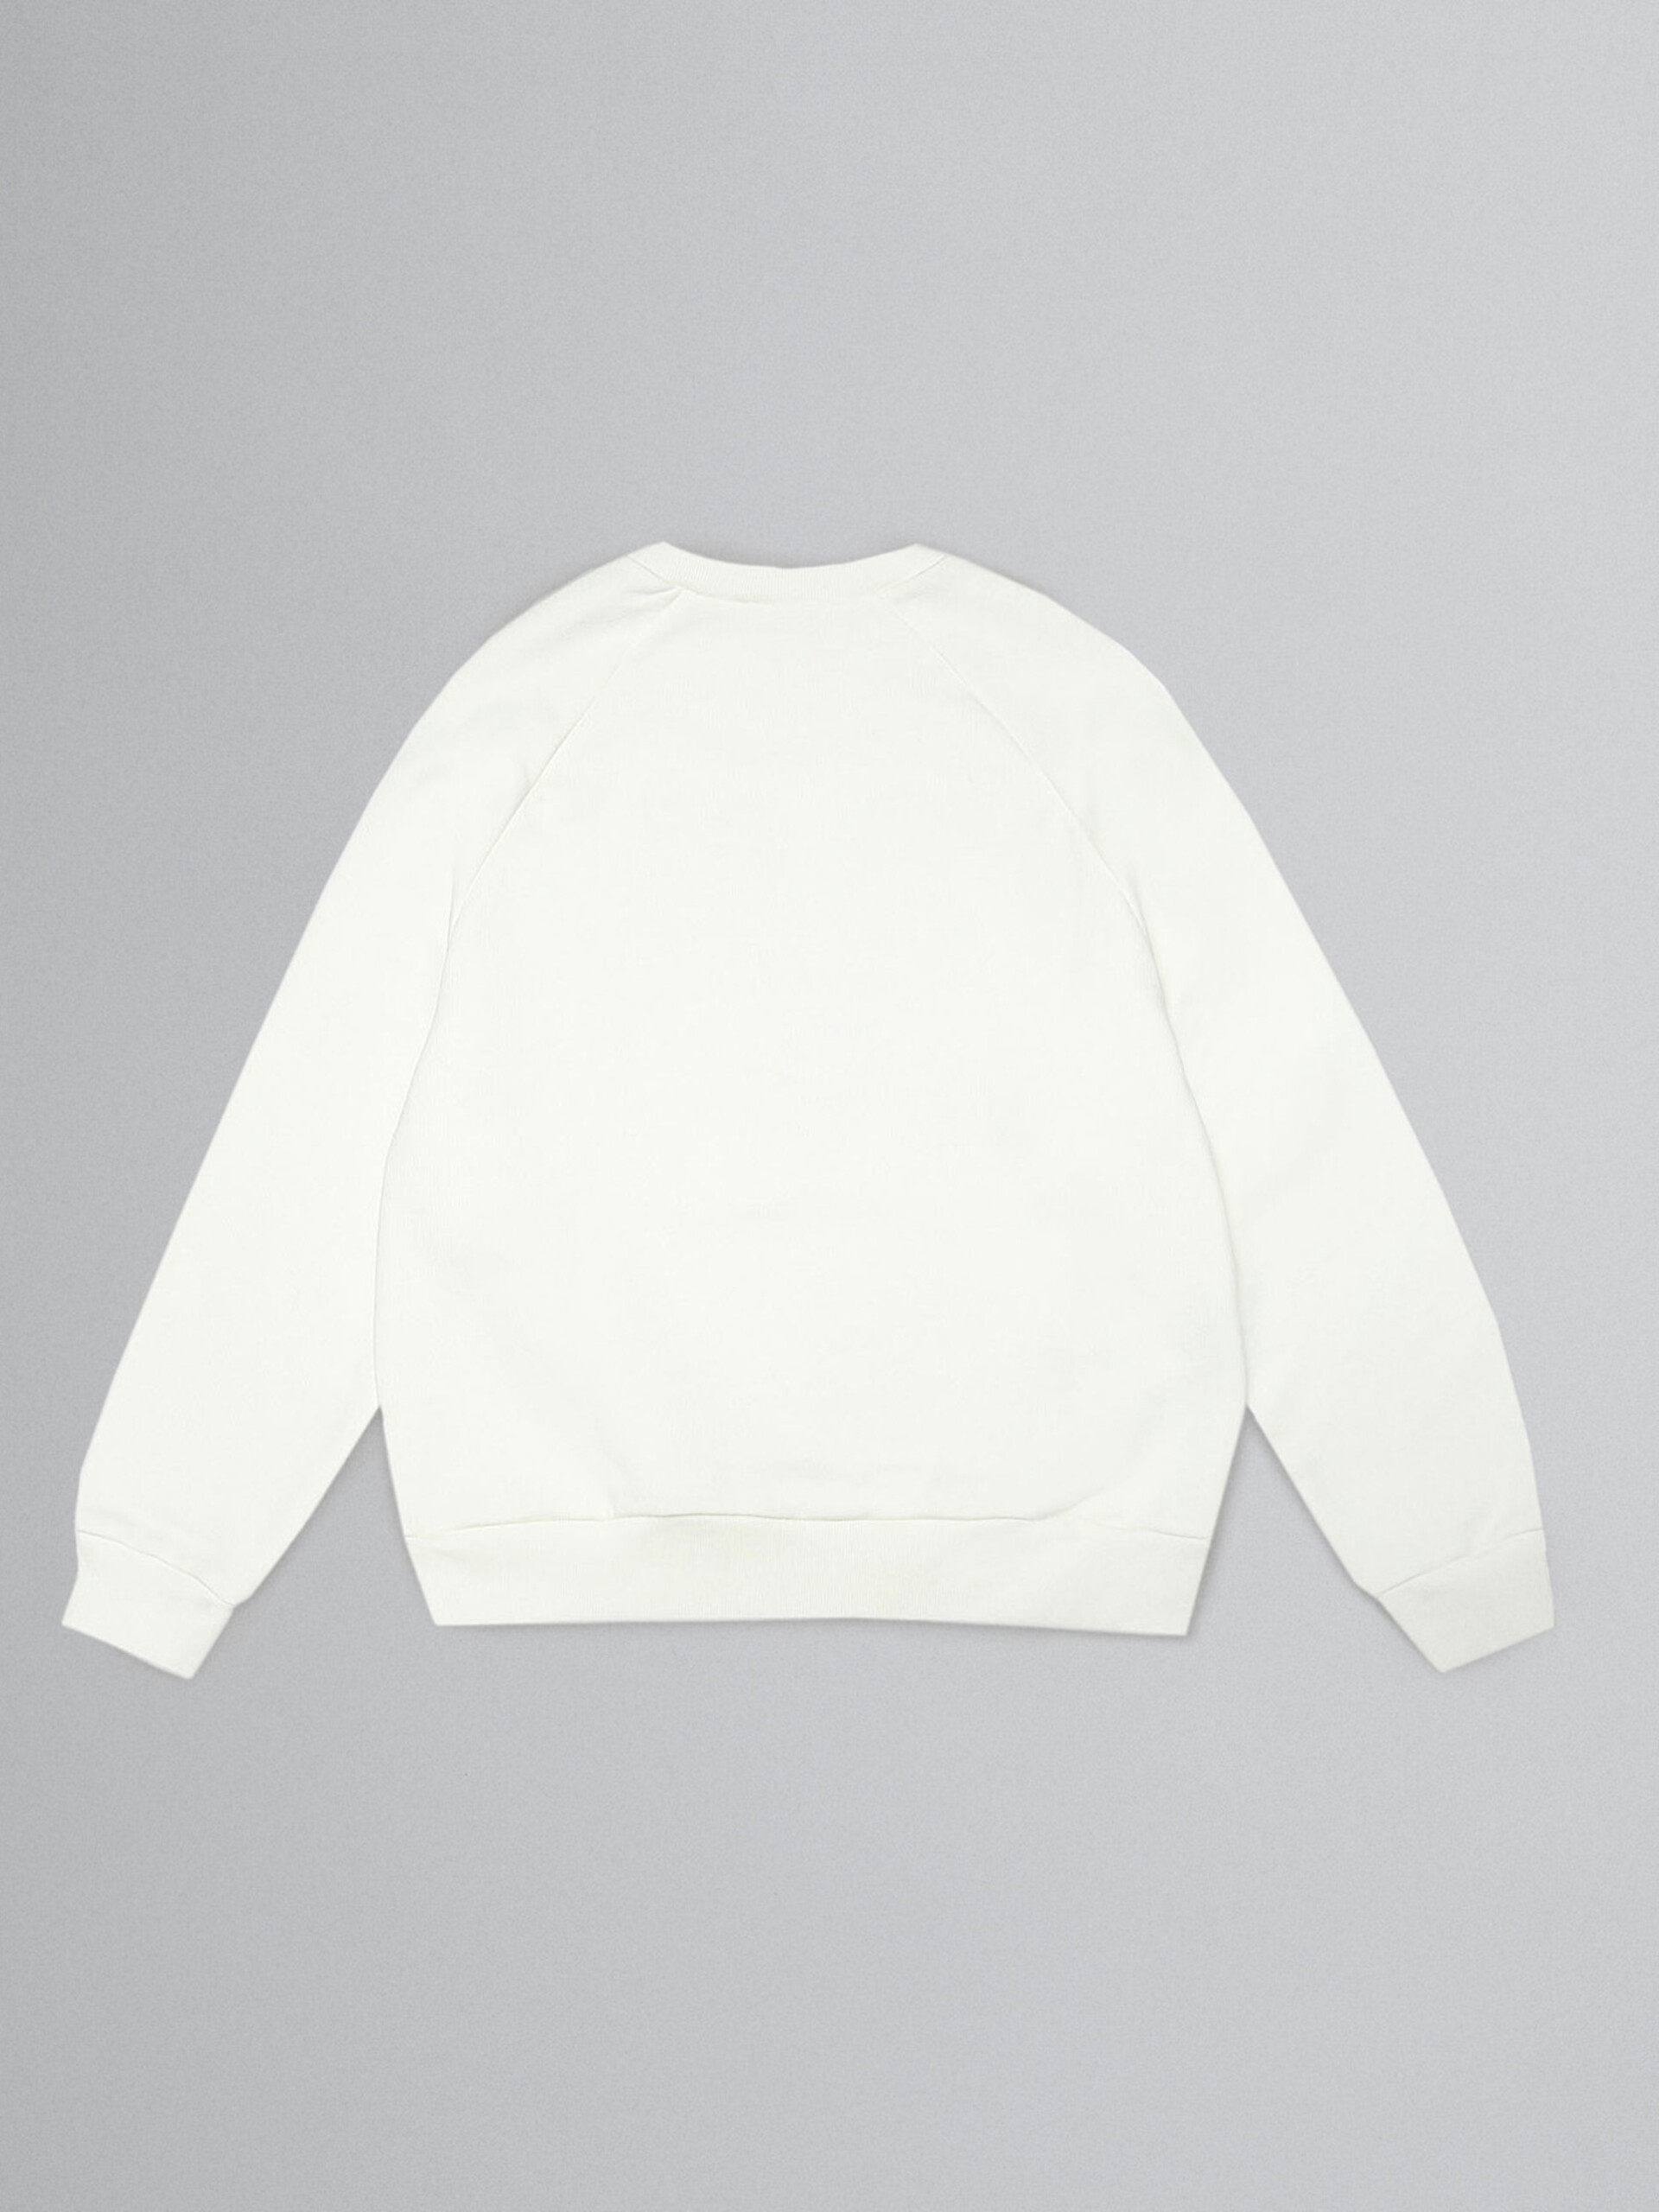 White sweatshirt with sequin "M" patch - Sweaters - Image 2